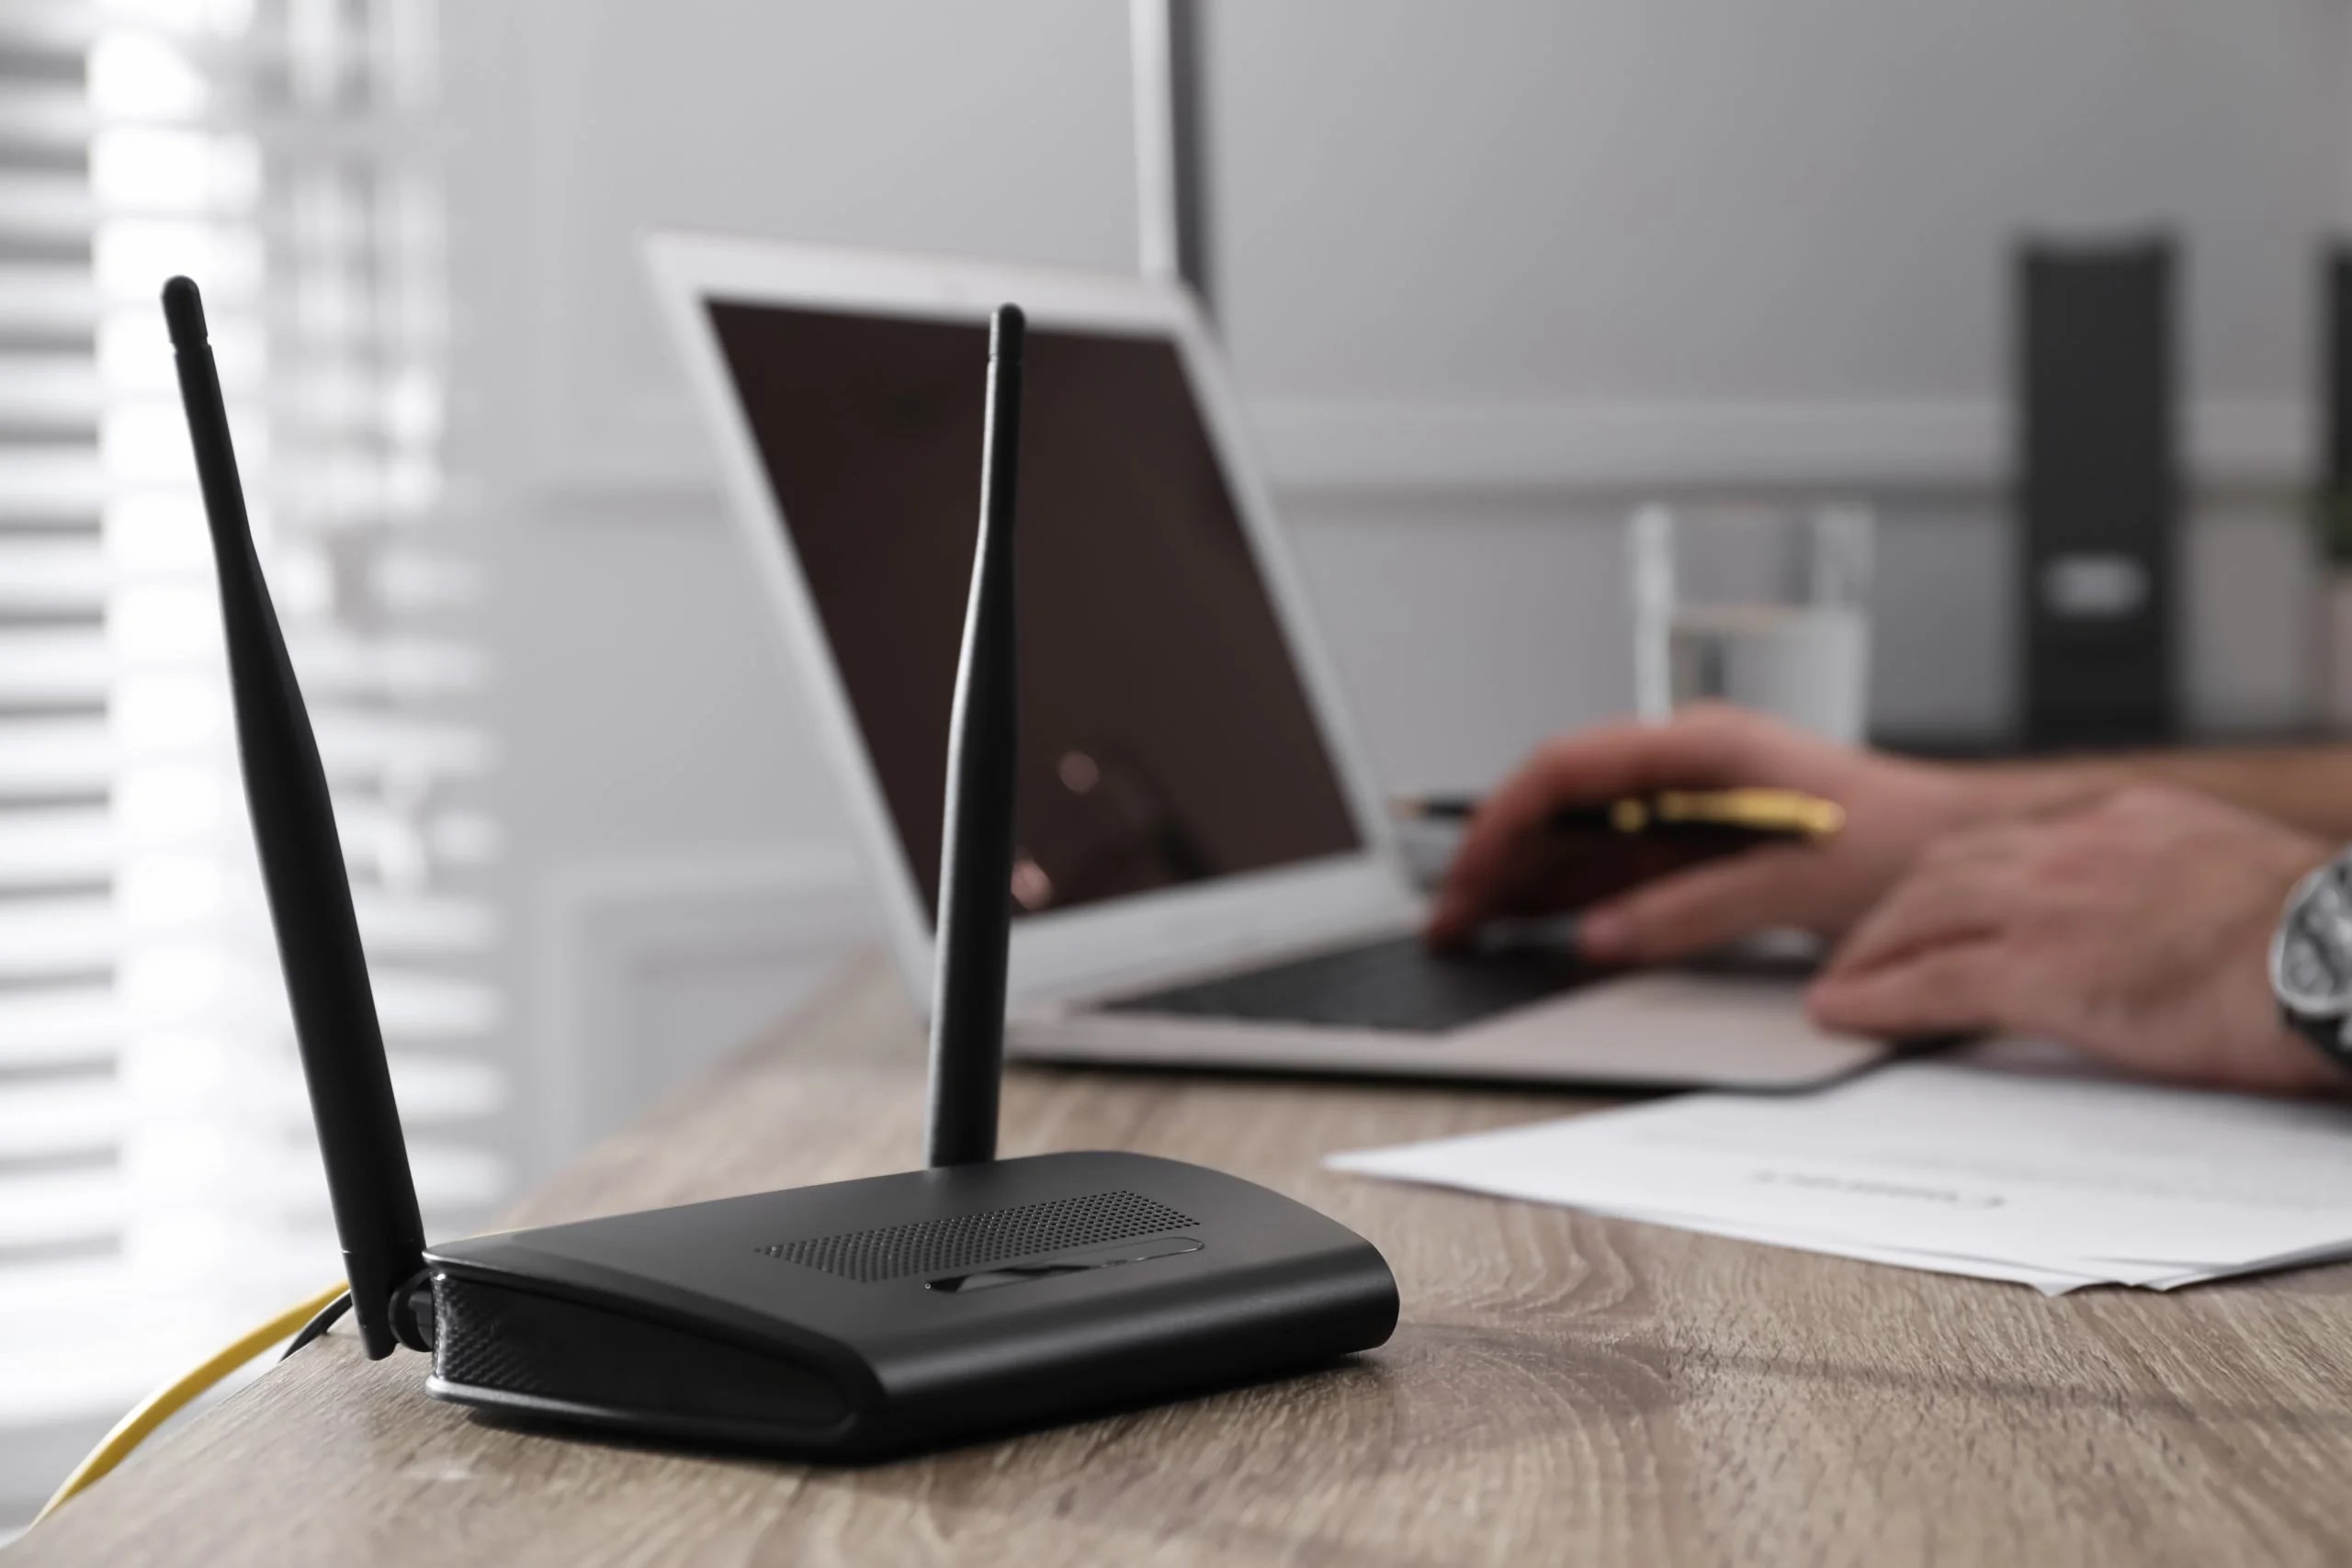 How To Set A Timer On A Wi-Fi Router